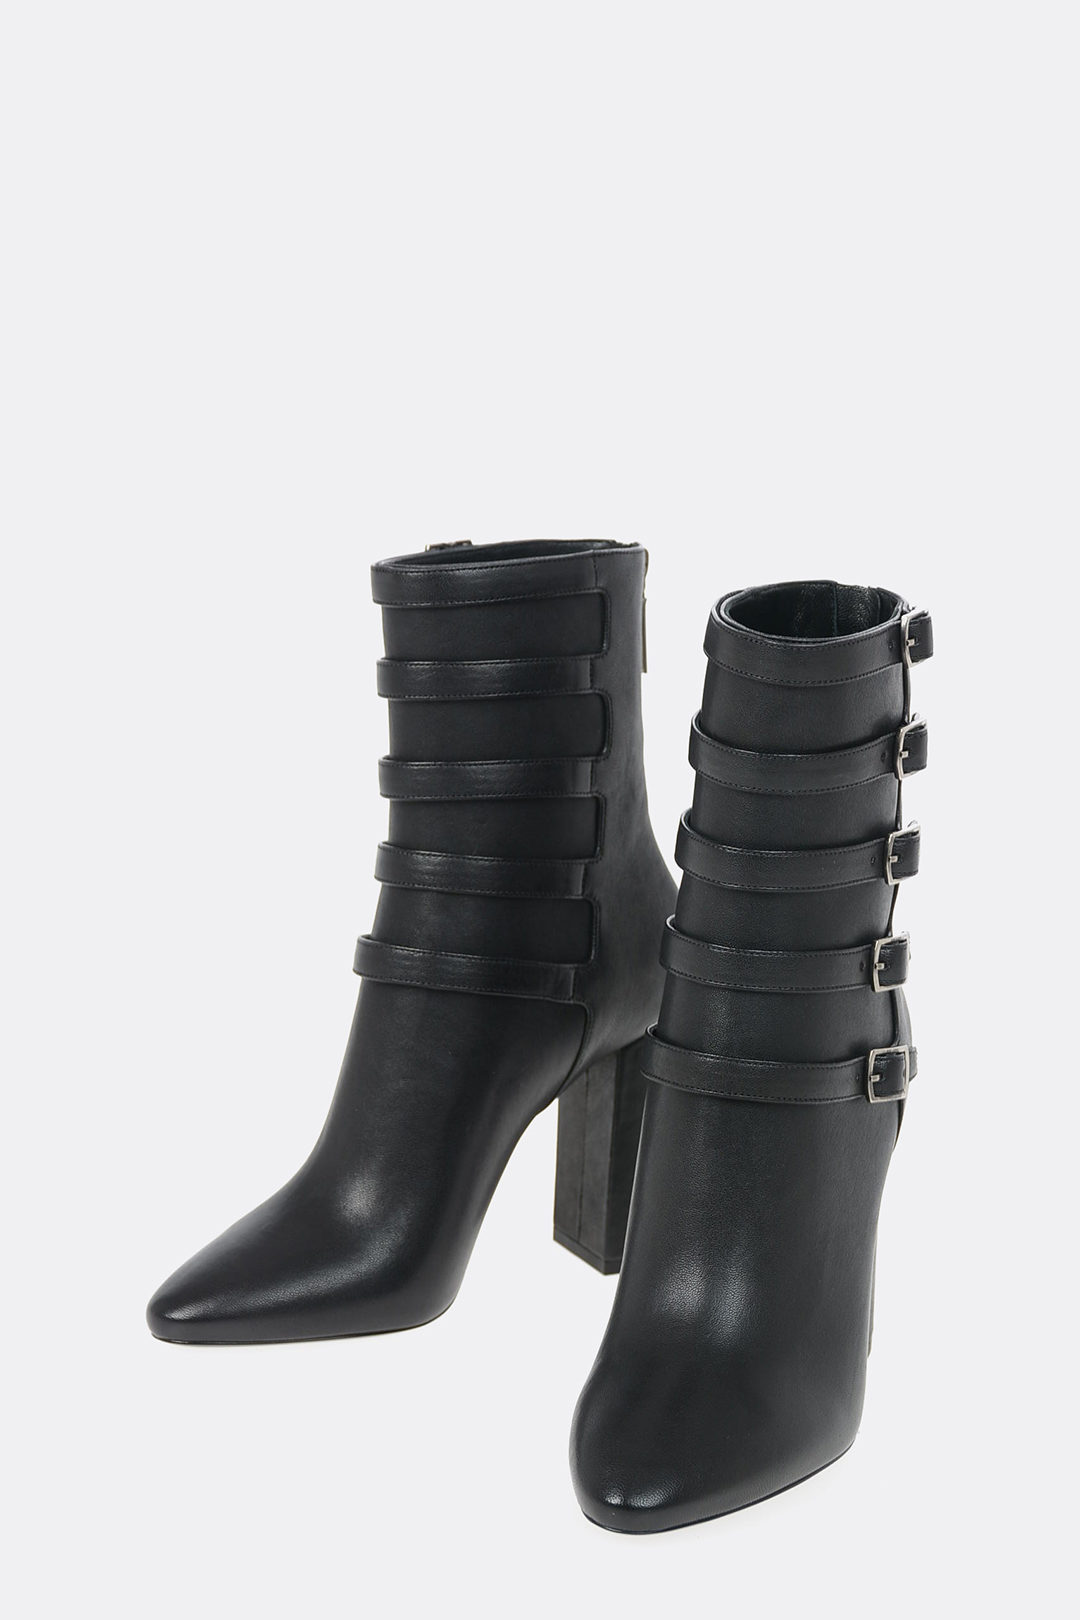 black leather calf length boots